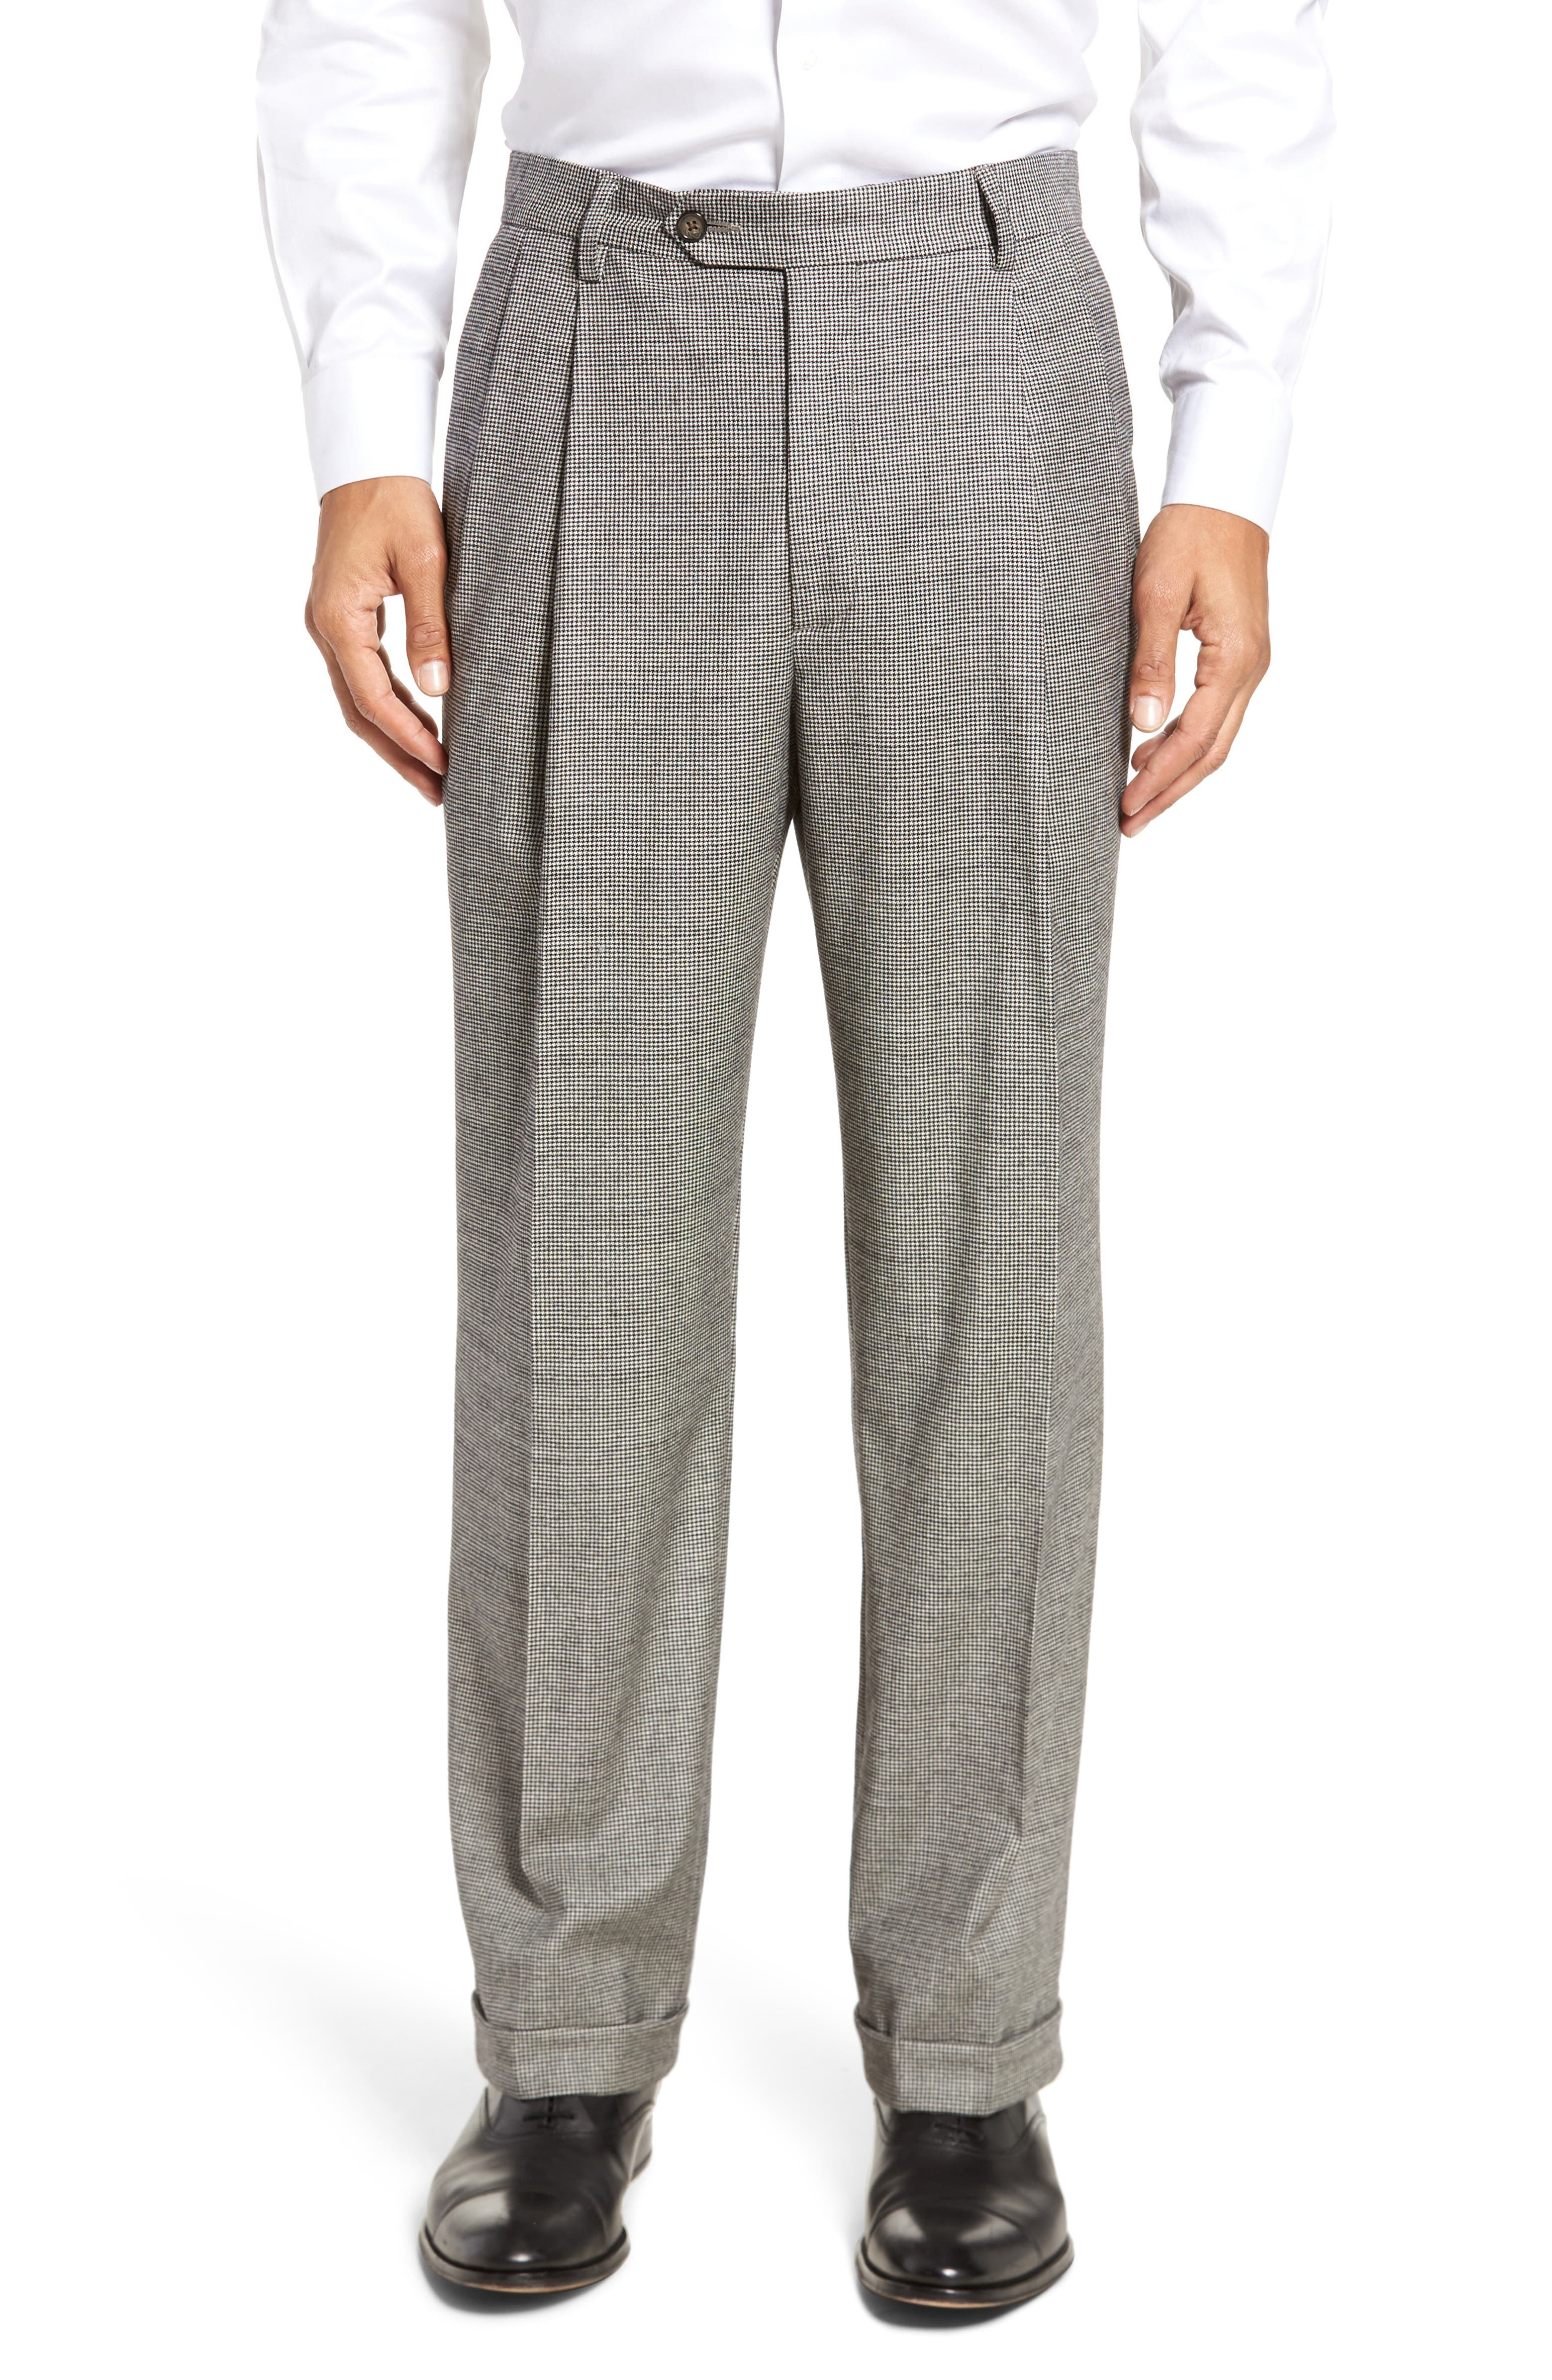 Berle Pleated Classic Fit Stretch Houndstooth Wool Dress Pants | Nordstrom